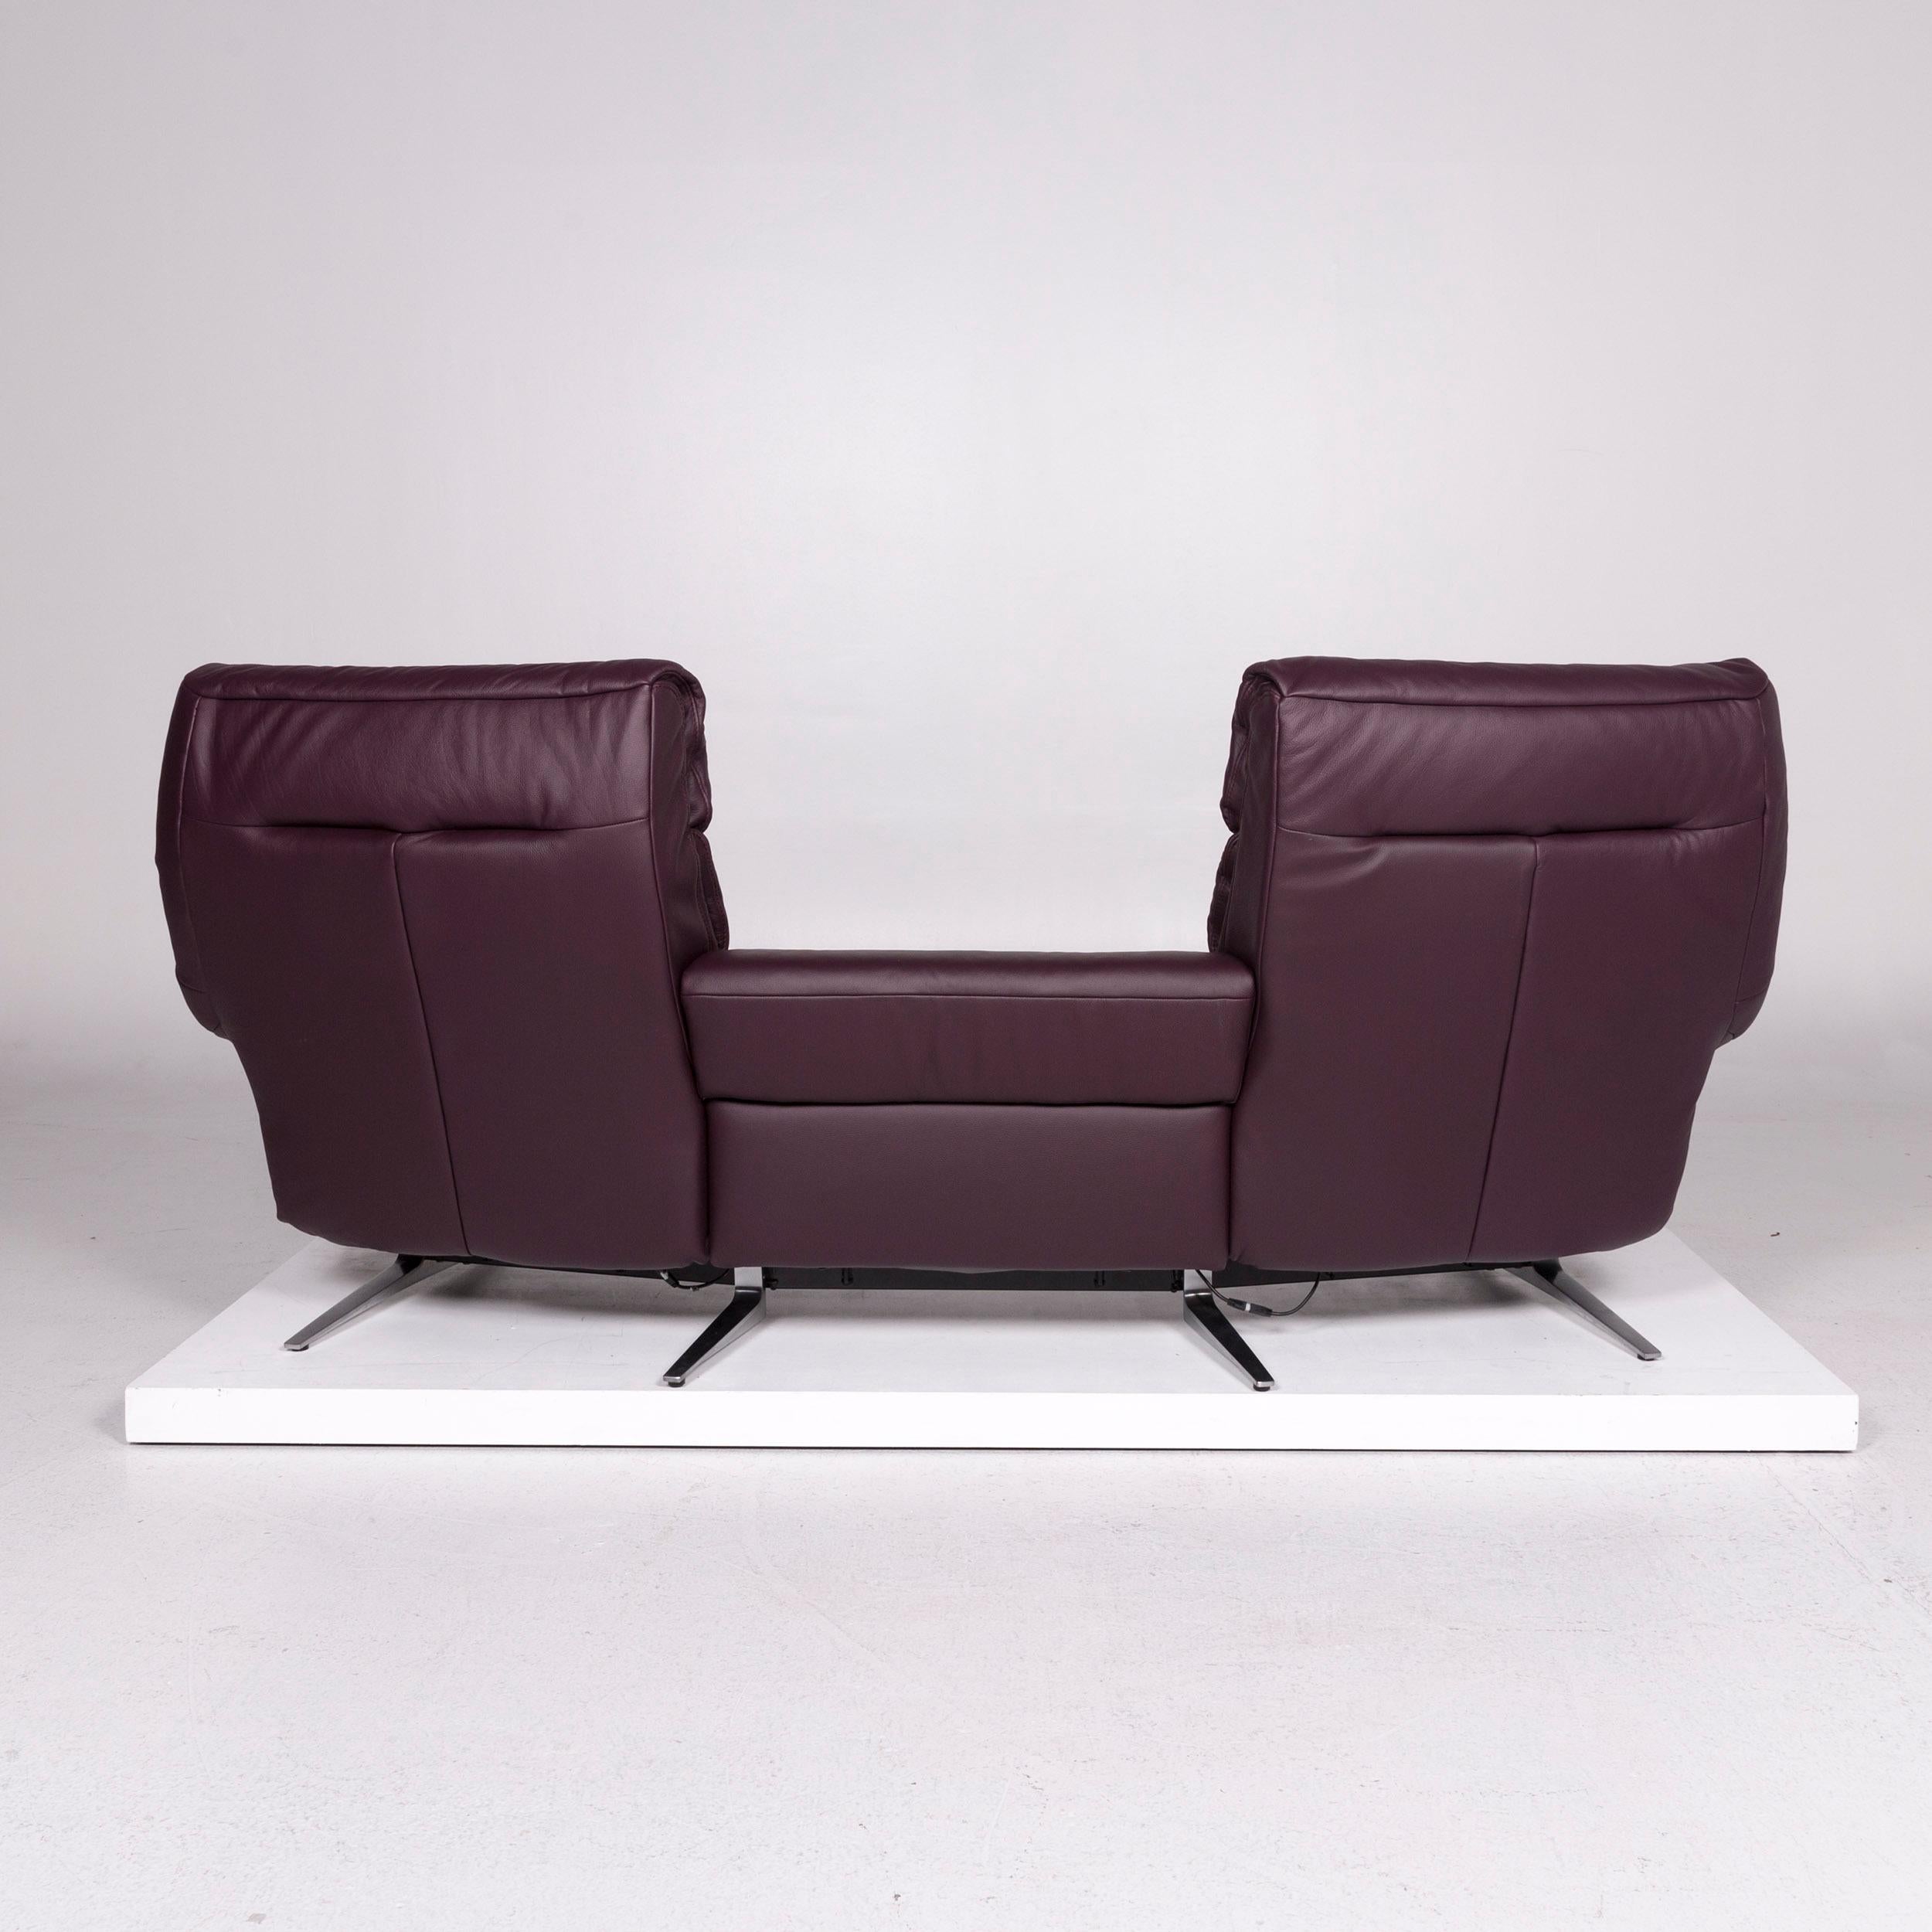 Himolla Leather Sofa Eggplant Purple Relax Function Electrical Function Couch 5